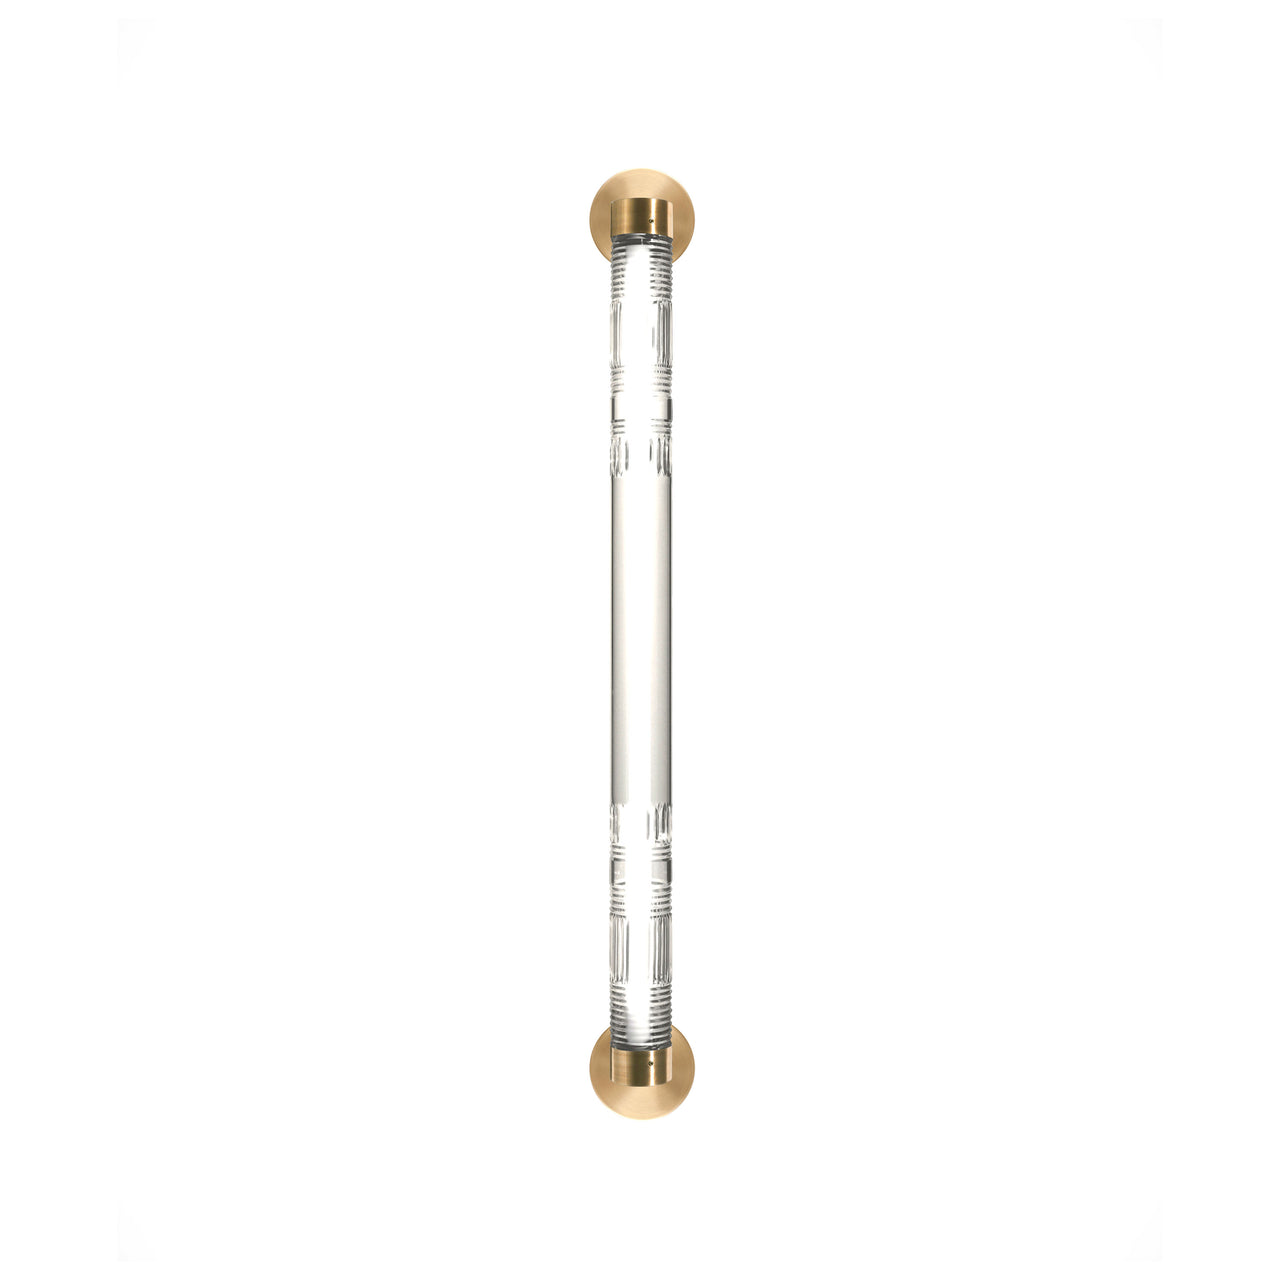 Crystal Tube Wall Light: Brushed Brass